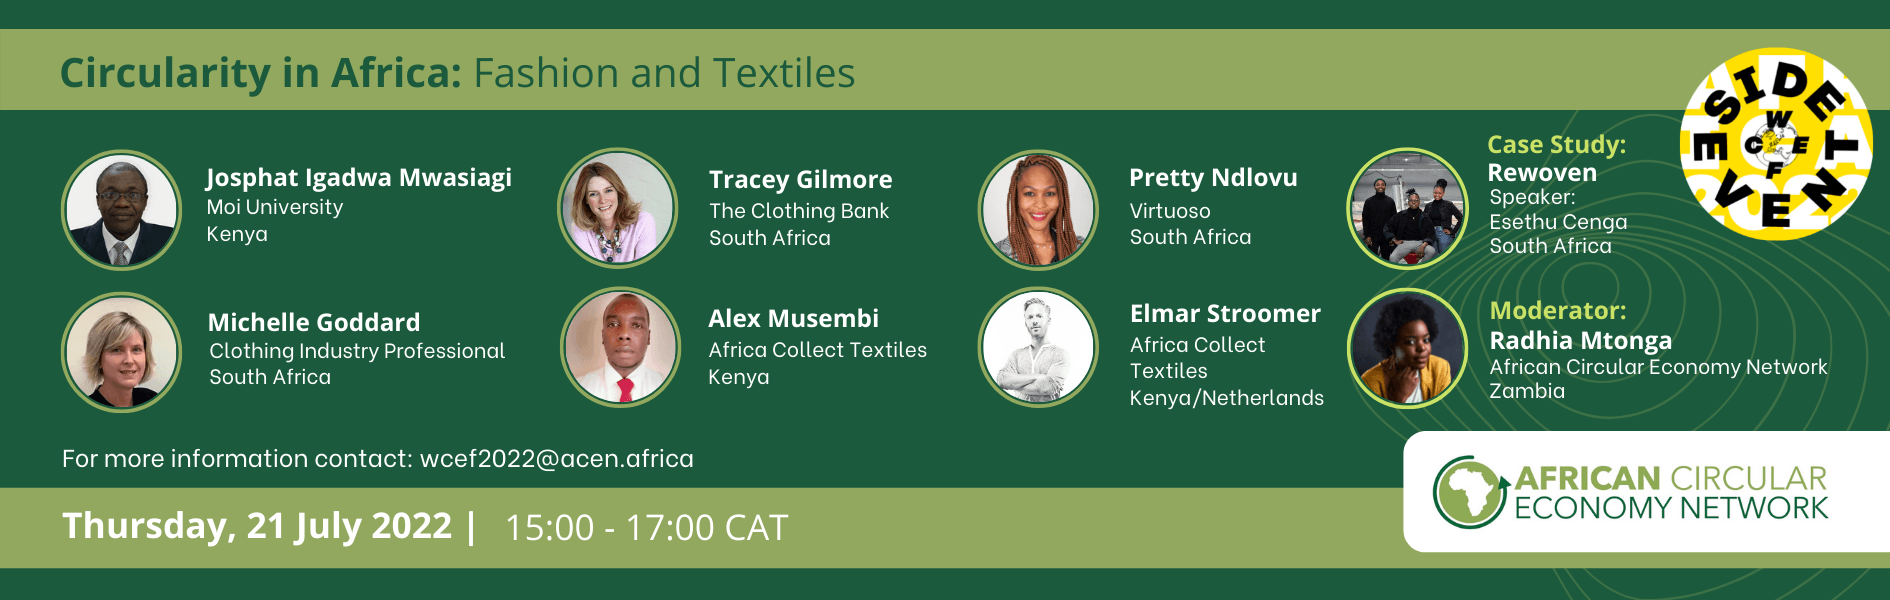 WCEF2022 and ACEN Event | Circularity in Africa: Fashion and Textiles Workshop